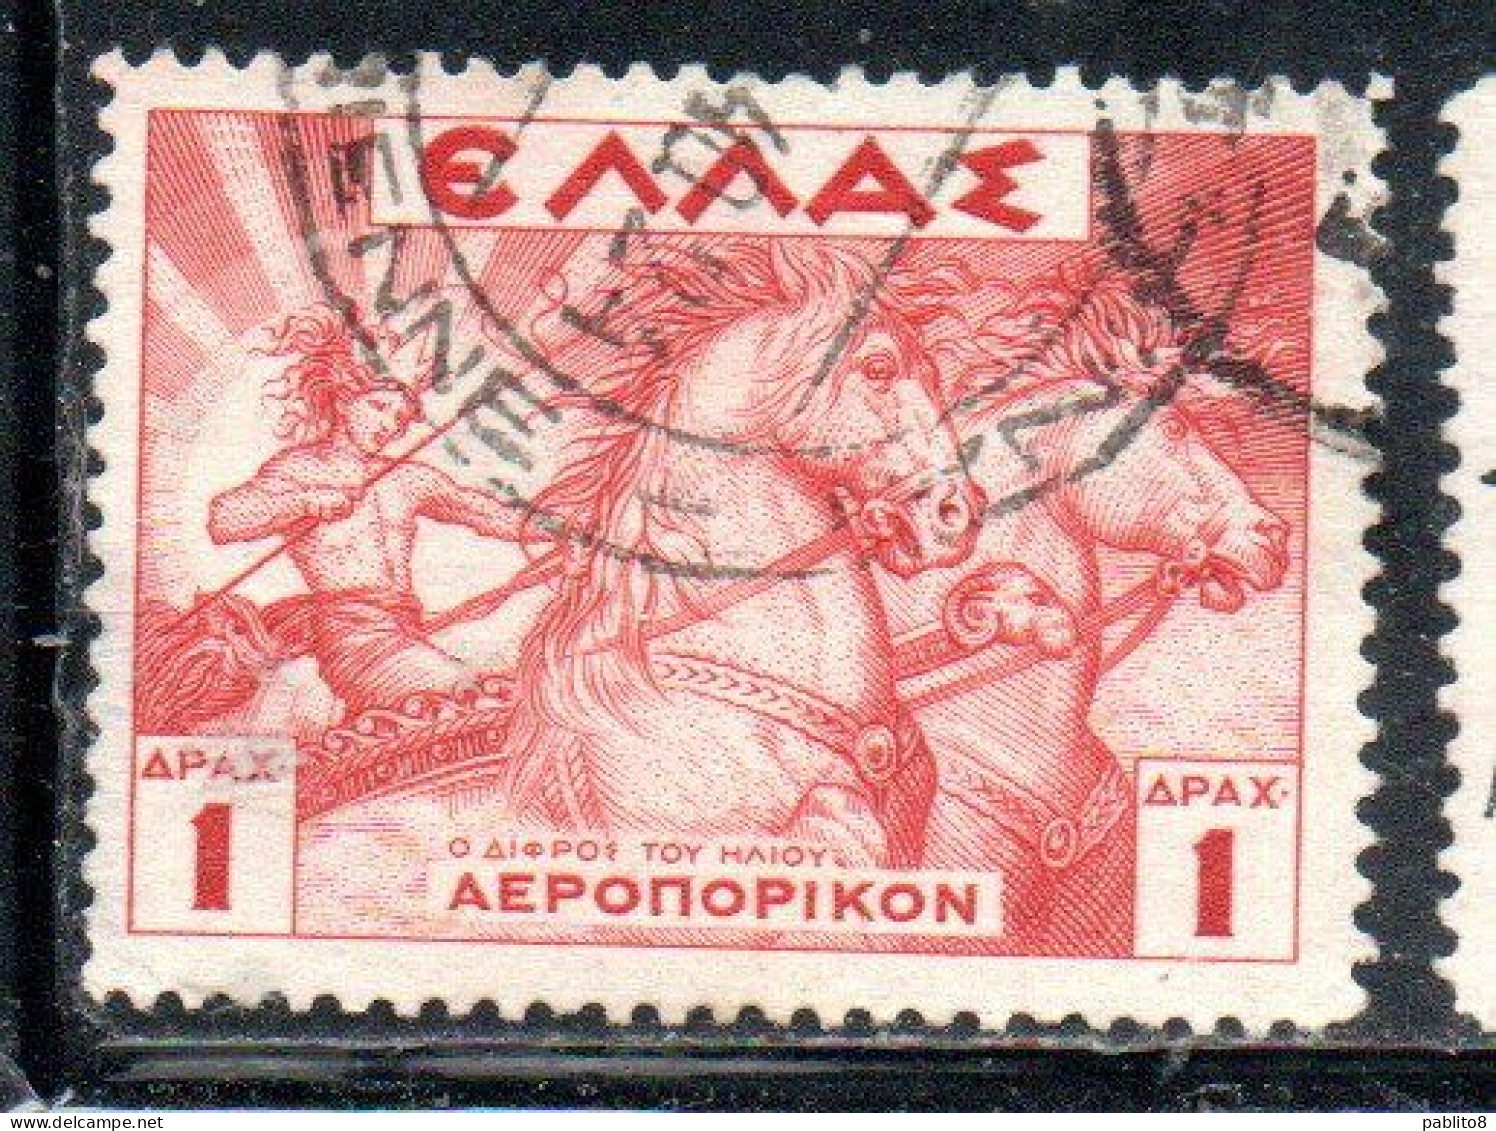 GREECE GRECIA ELLAS 1935 AIR POST MAIL AIRMAIL MYTHOLOGICAL HELIOS DRIVING THE SUN CHARIOT 1d USED USATO OBLITERE' - Gebruikt